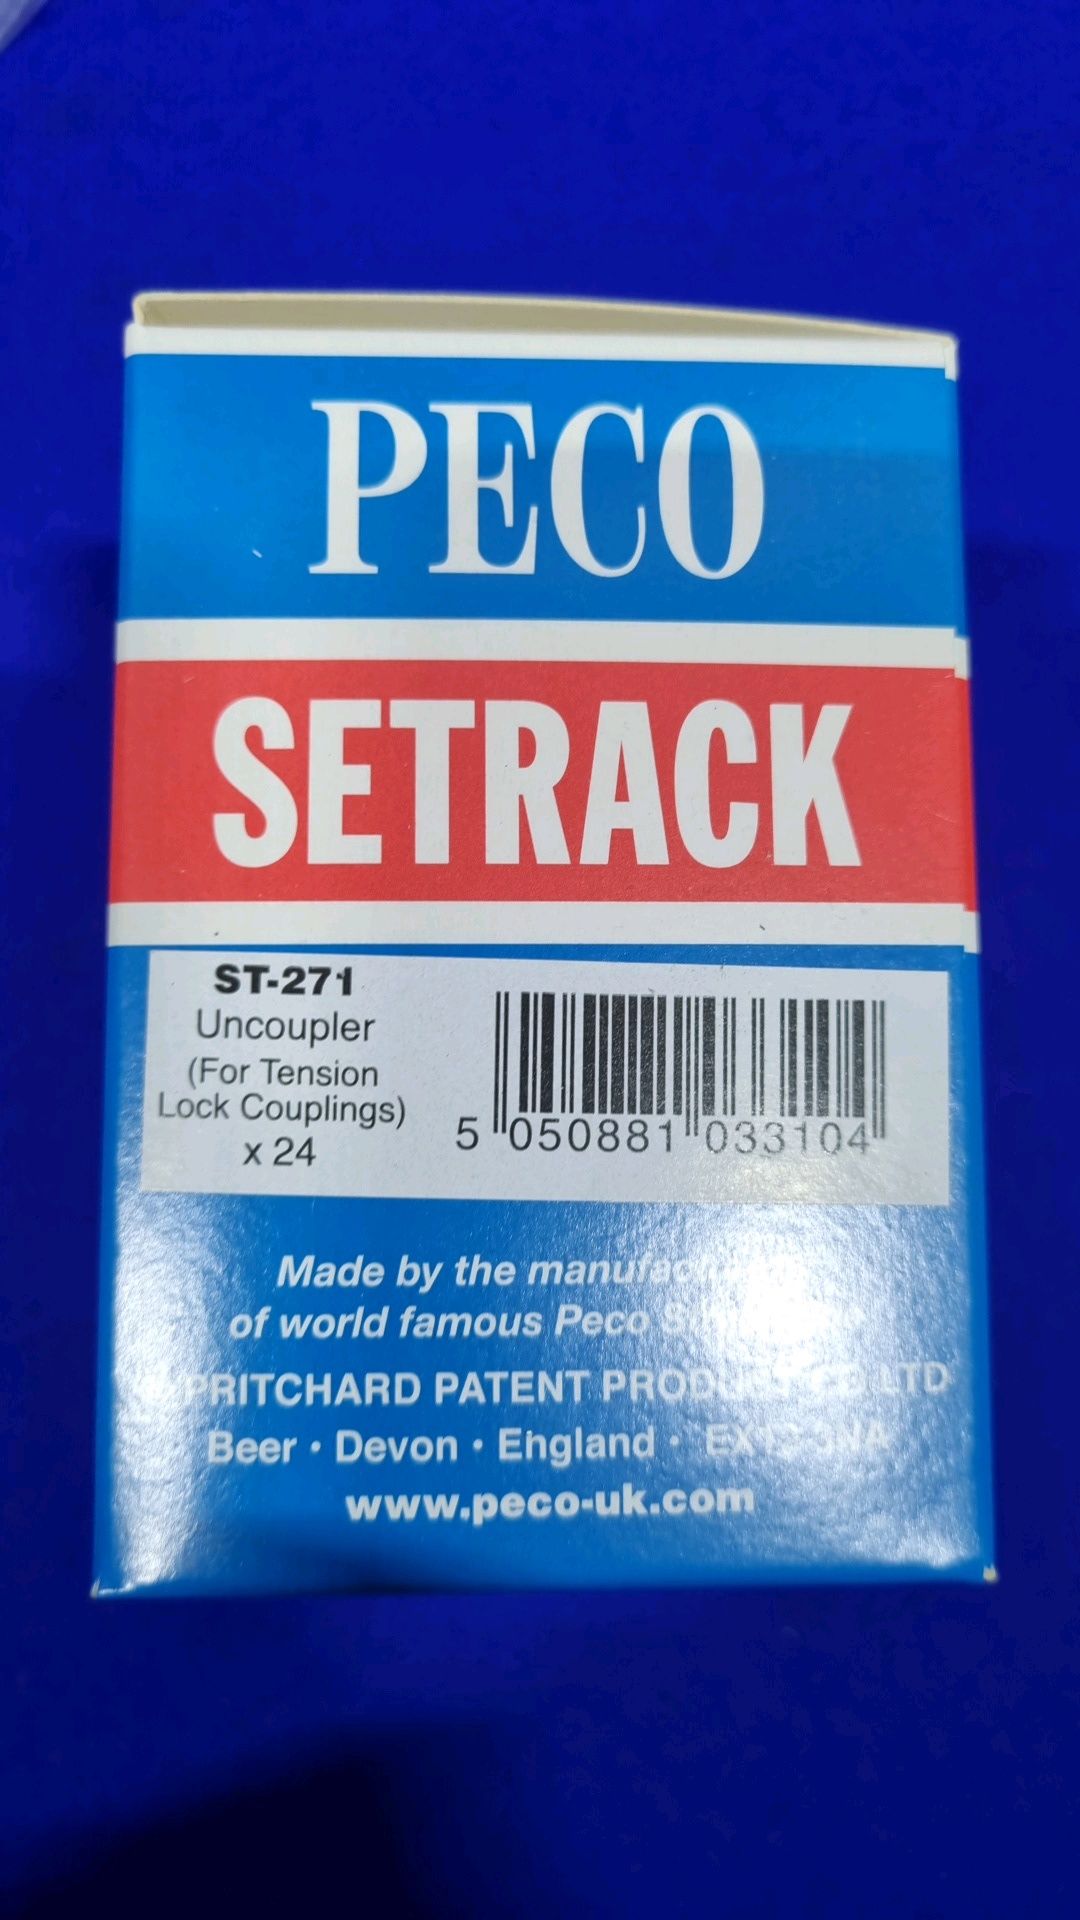 1 x Box Of 24 Peco Uncoupler For Tension Lock Couplings ST-271 - Image 3 of 3